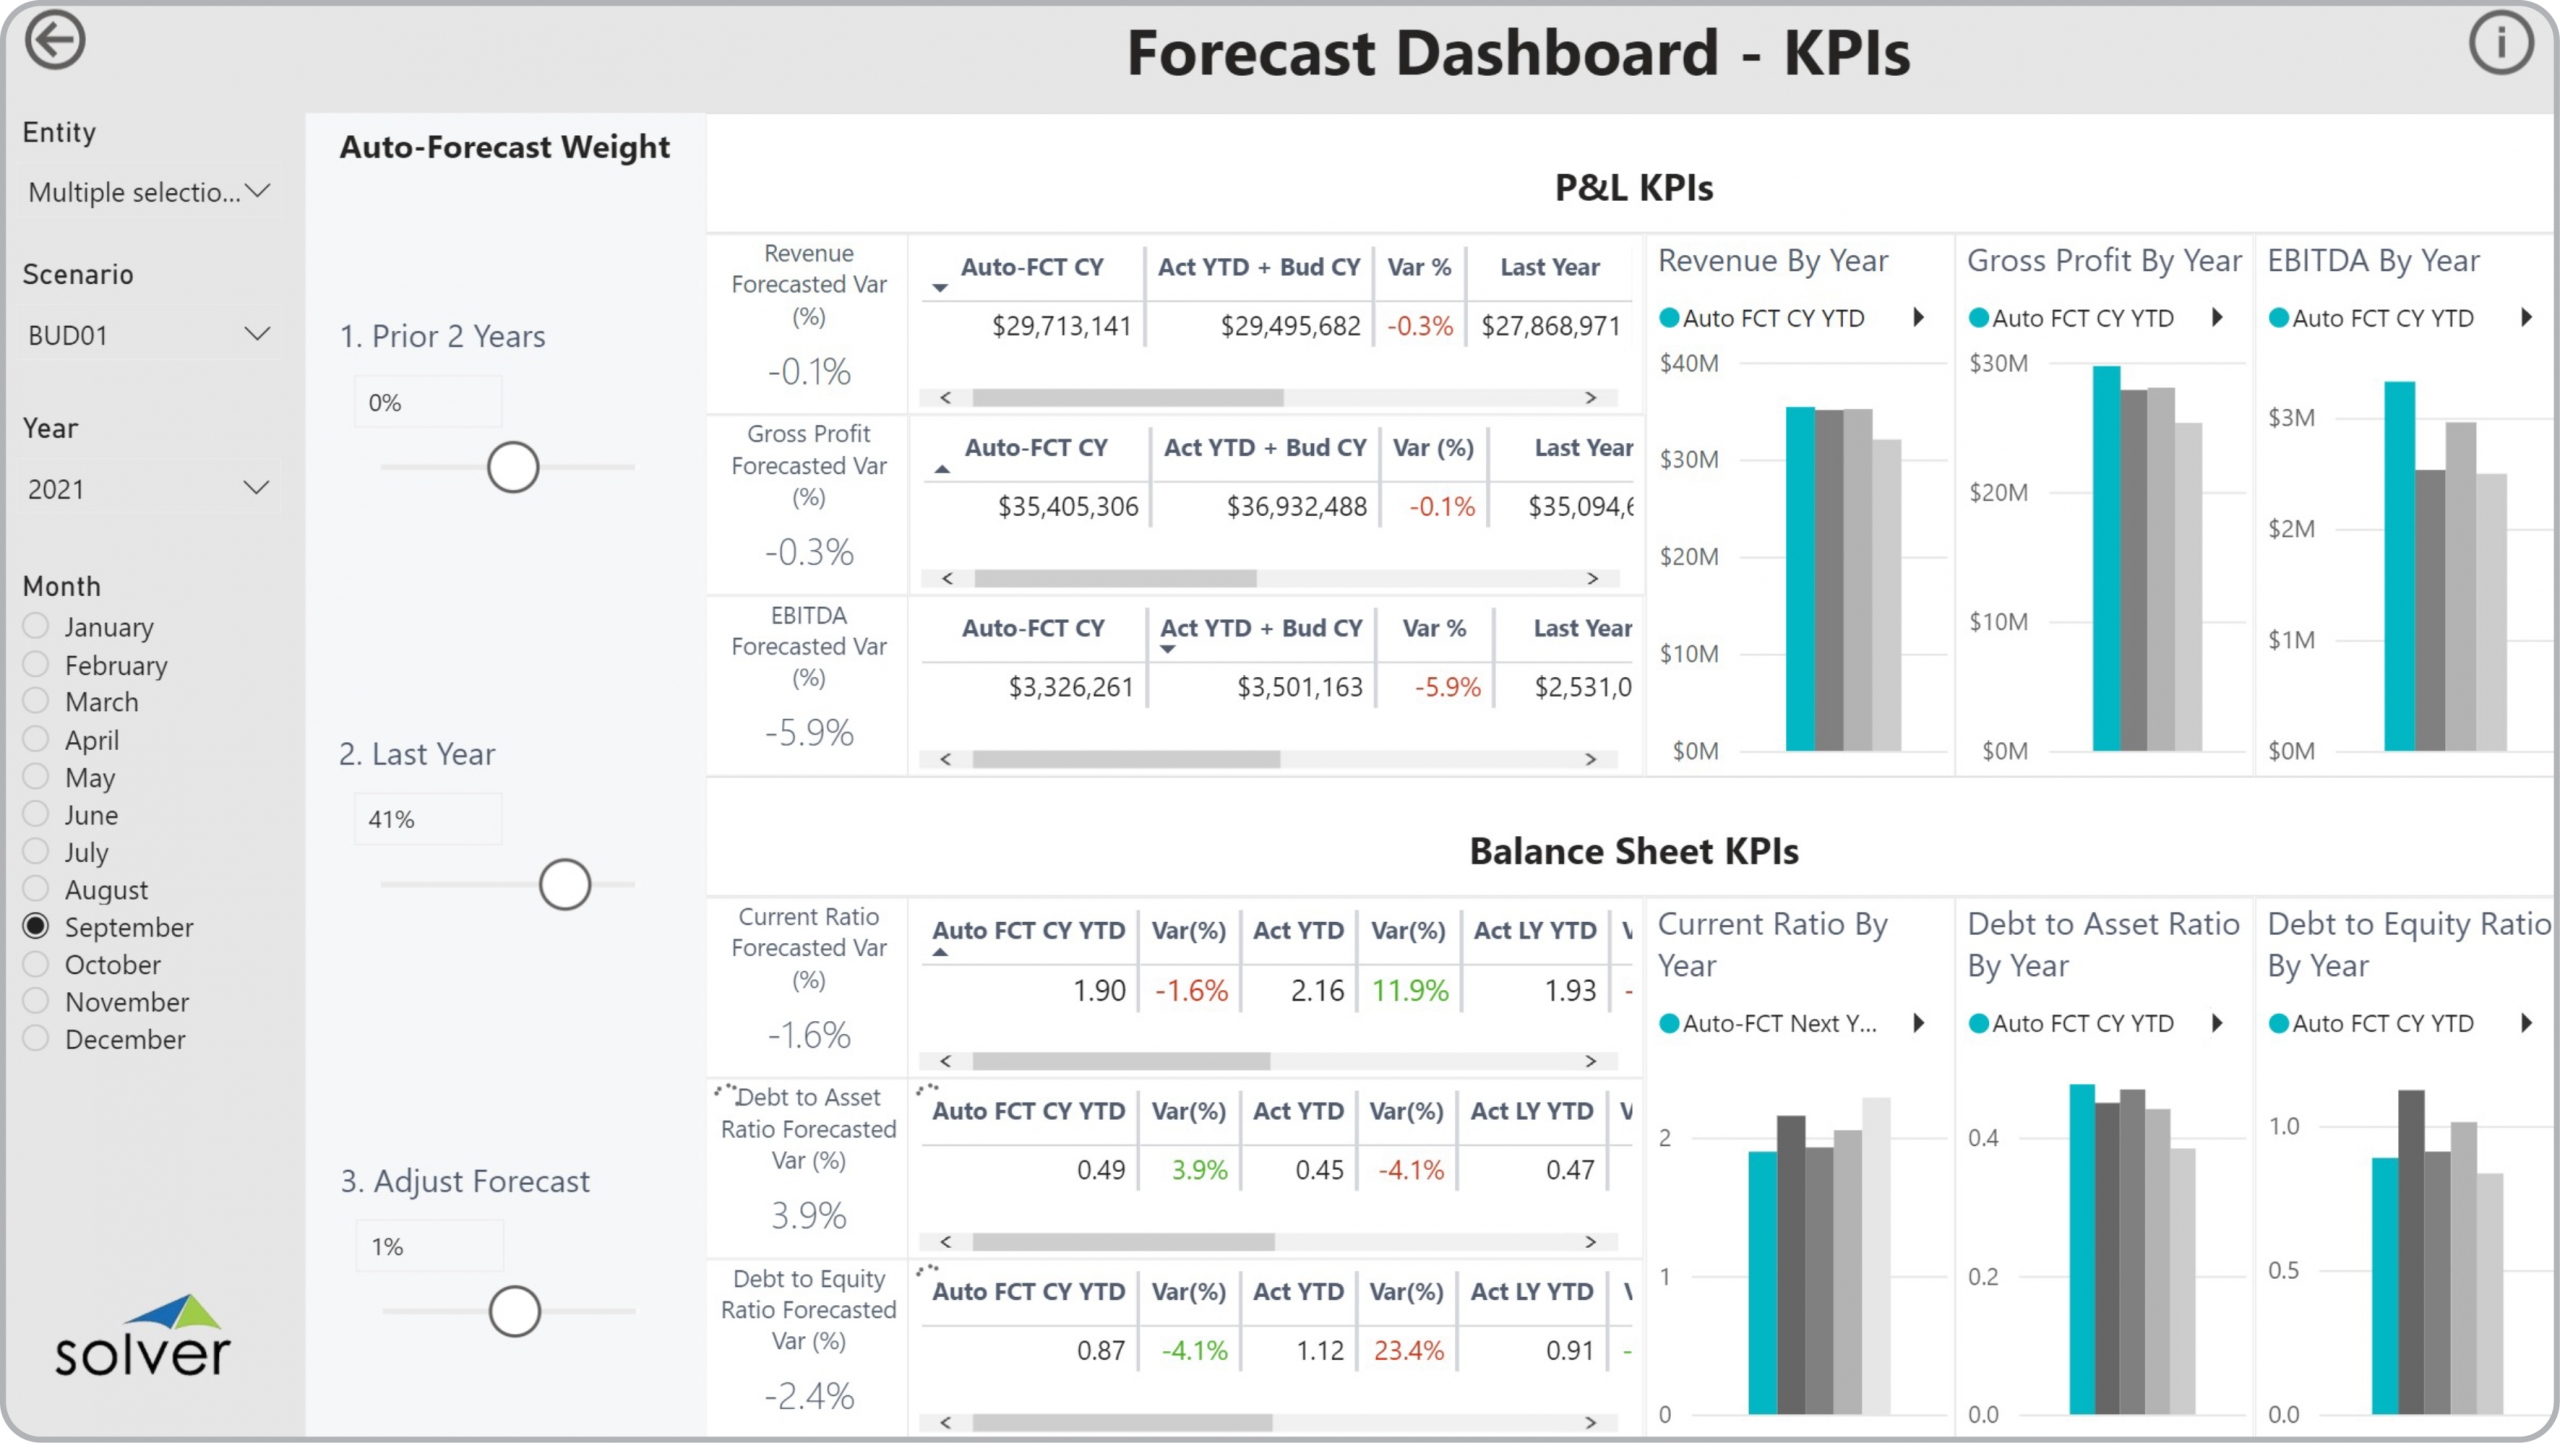 Example of a KPI Simulation Dashboard to Streamline the Modelling and Forecasting Process